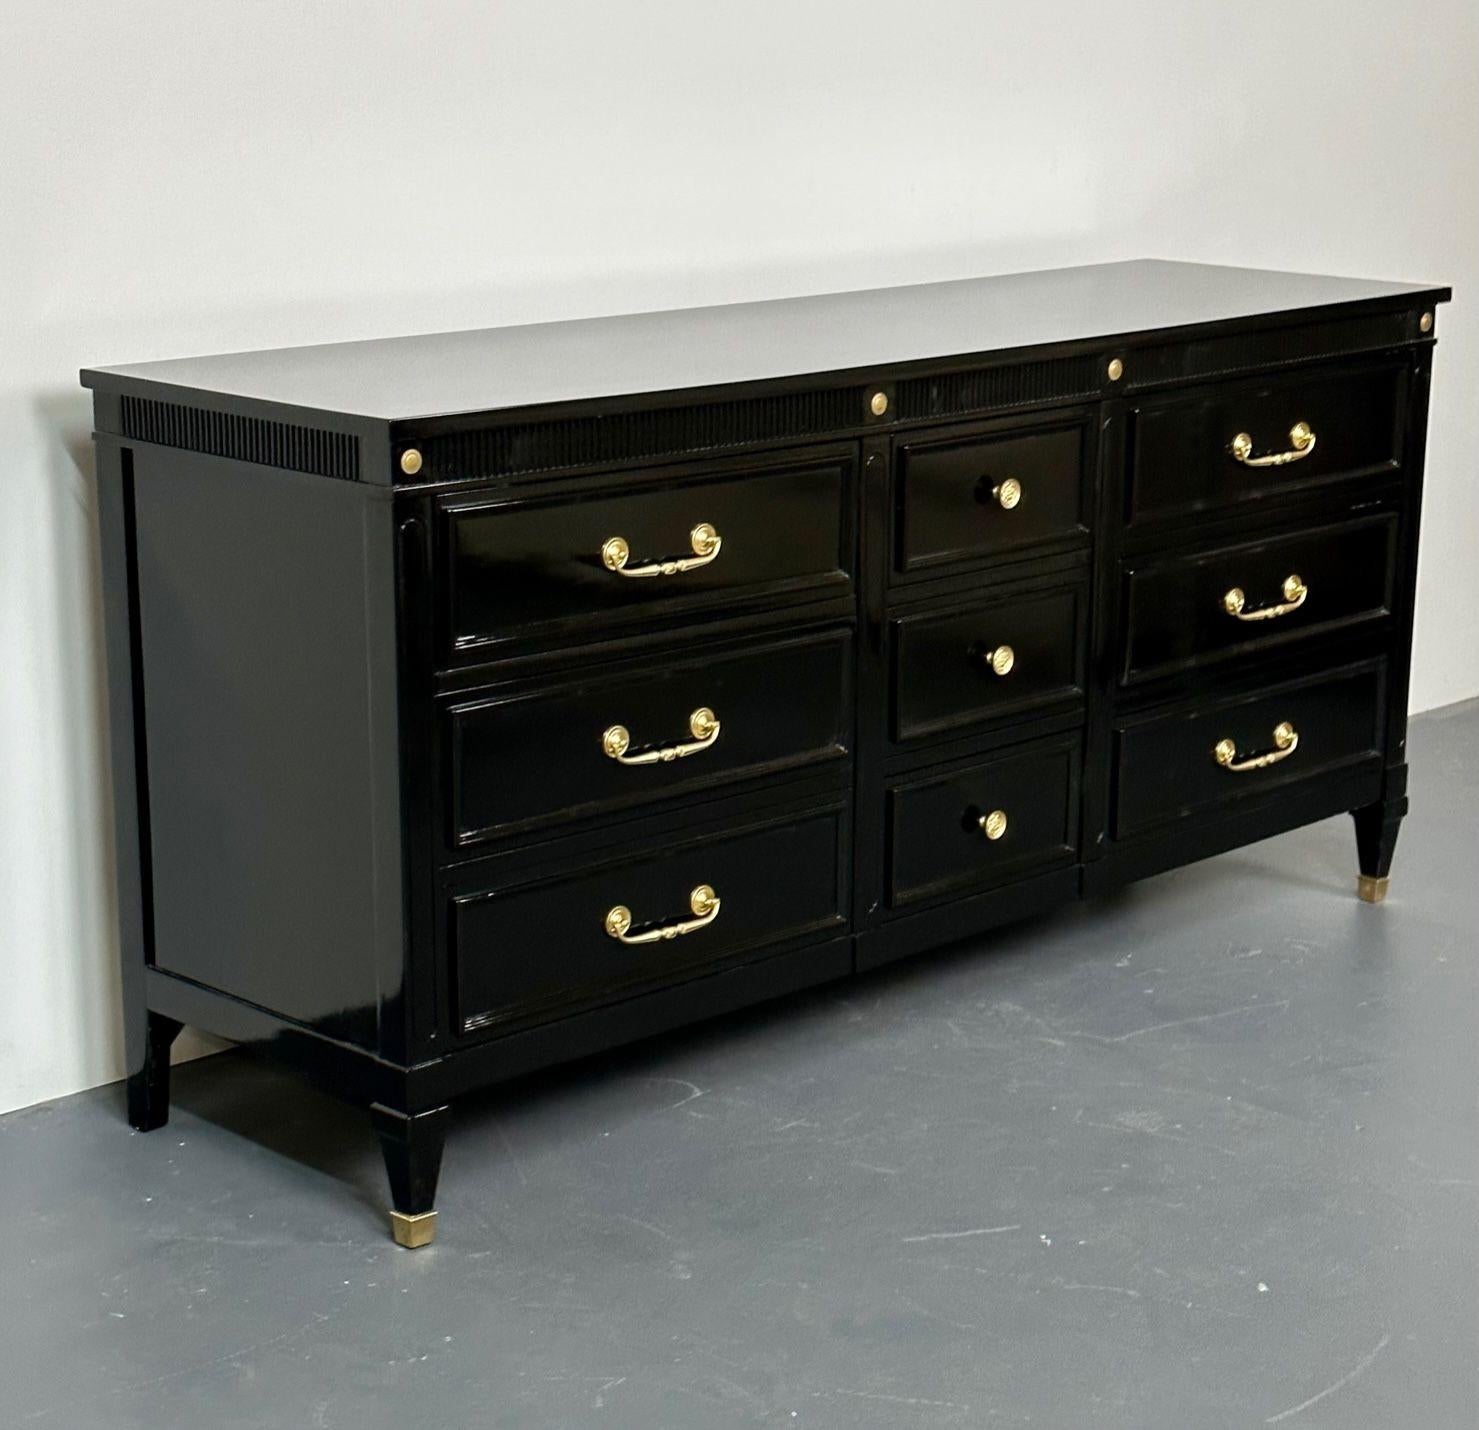 Hollywood Regency Black Lacquer Dresser, Chest, Sideboard, Maison Jansen Style
Recently lacquered in a fine Steinway Piano finish, this rich ebony dresser or commode has three center drawers flanked by three side drawers, all of which feature